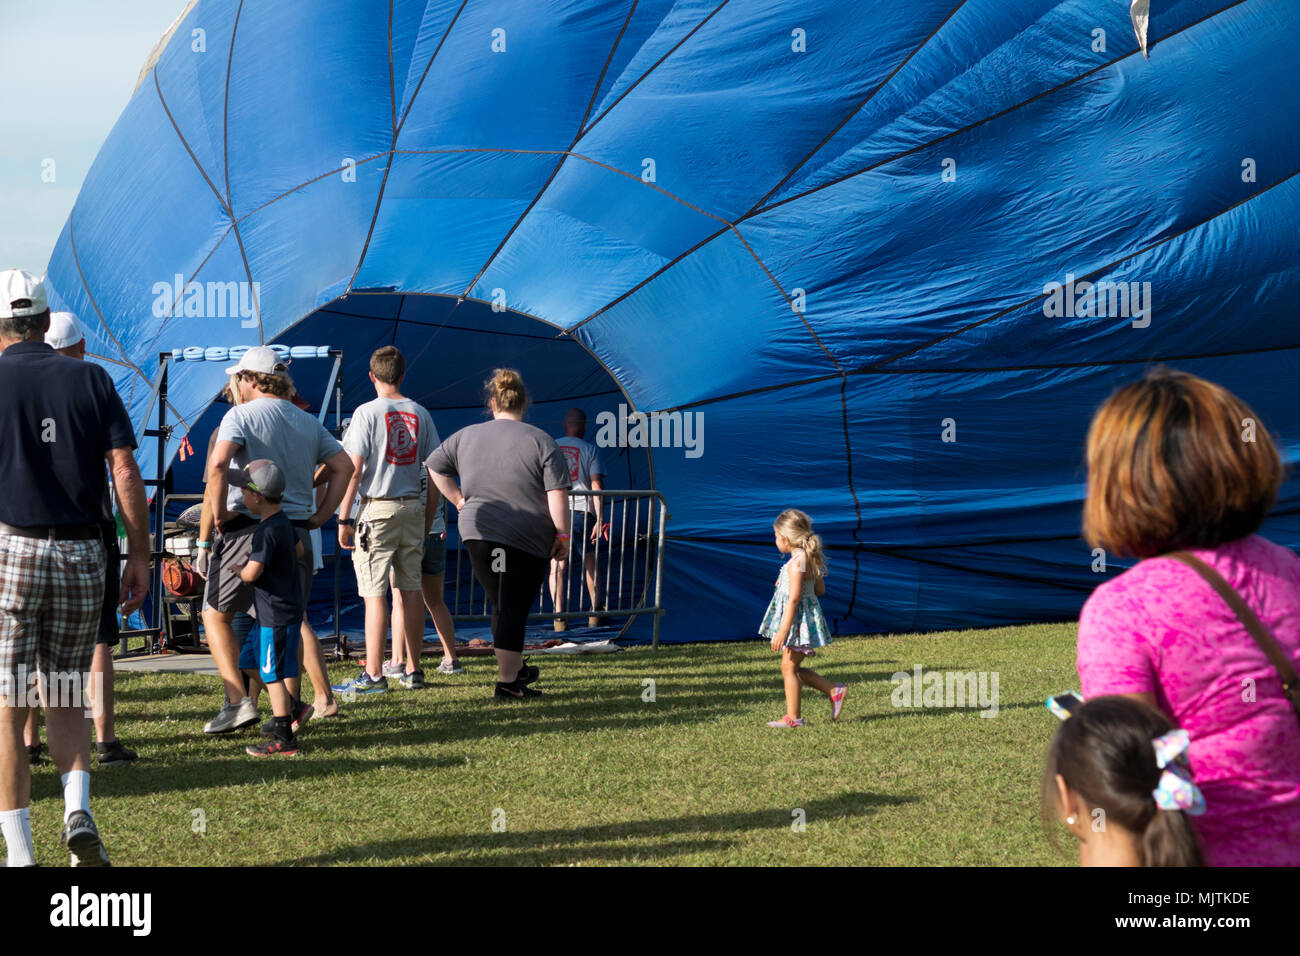 People lined up to walk inside a partially inflated hot air balloon at the 14th annual Hot Air Balloon Festival in Foley, Alabama. Stock Photo